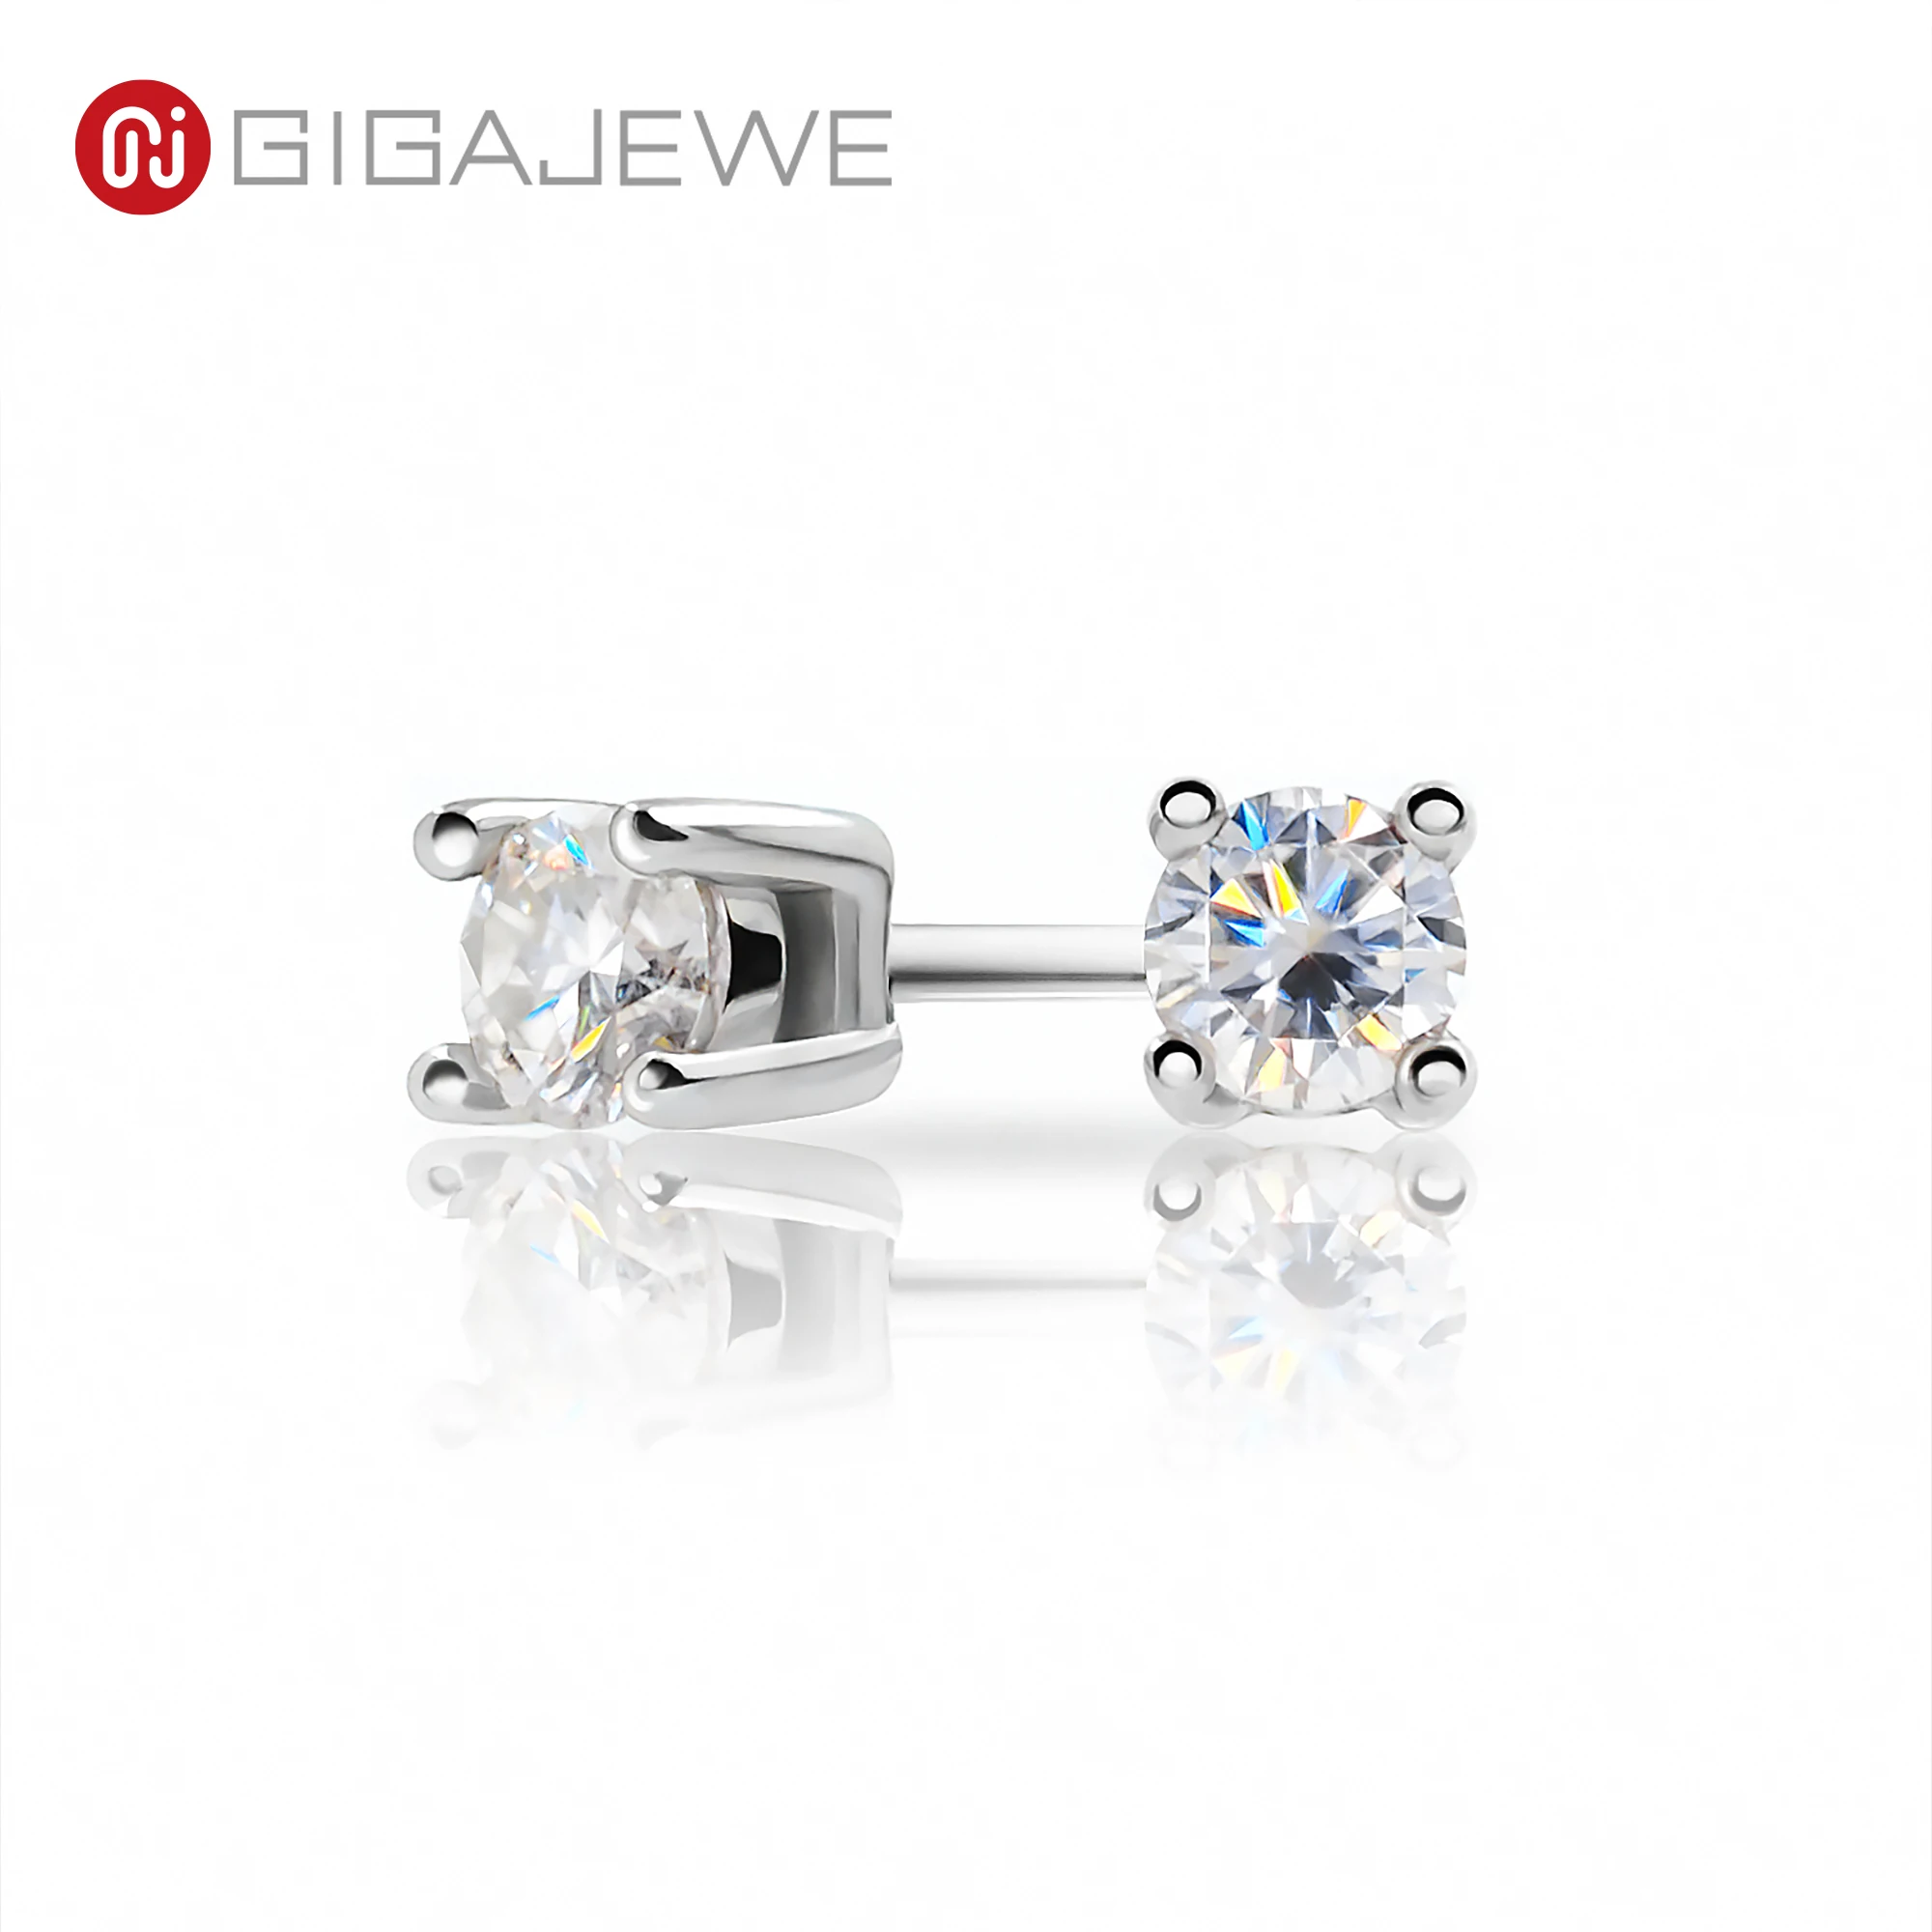 

GIGAJEWE 925 silver jewelry Plated 18K Gold Earring 3mm 0.1ct Round Cut EF White Color Moissanite Stud Earrings